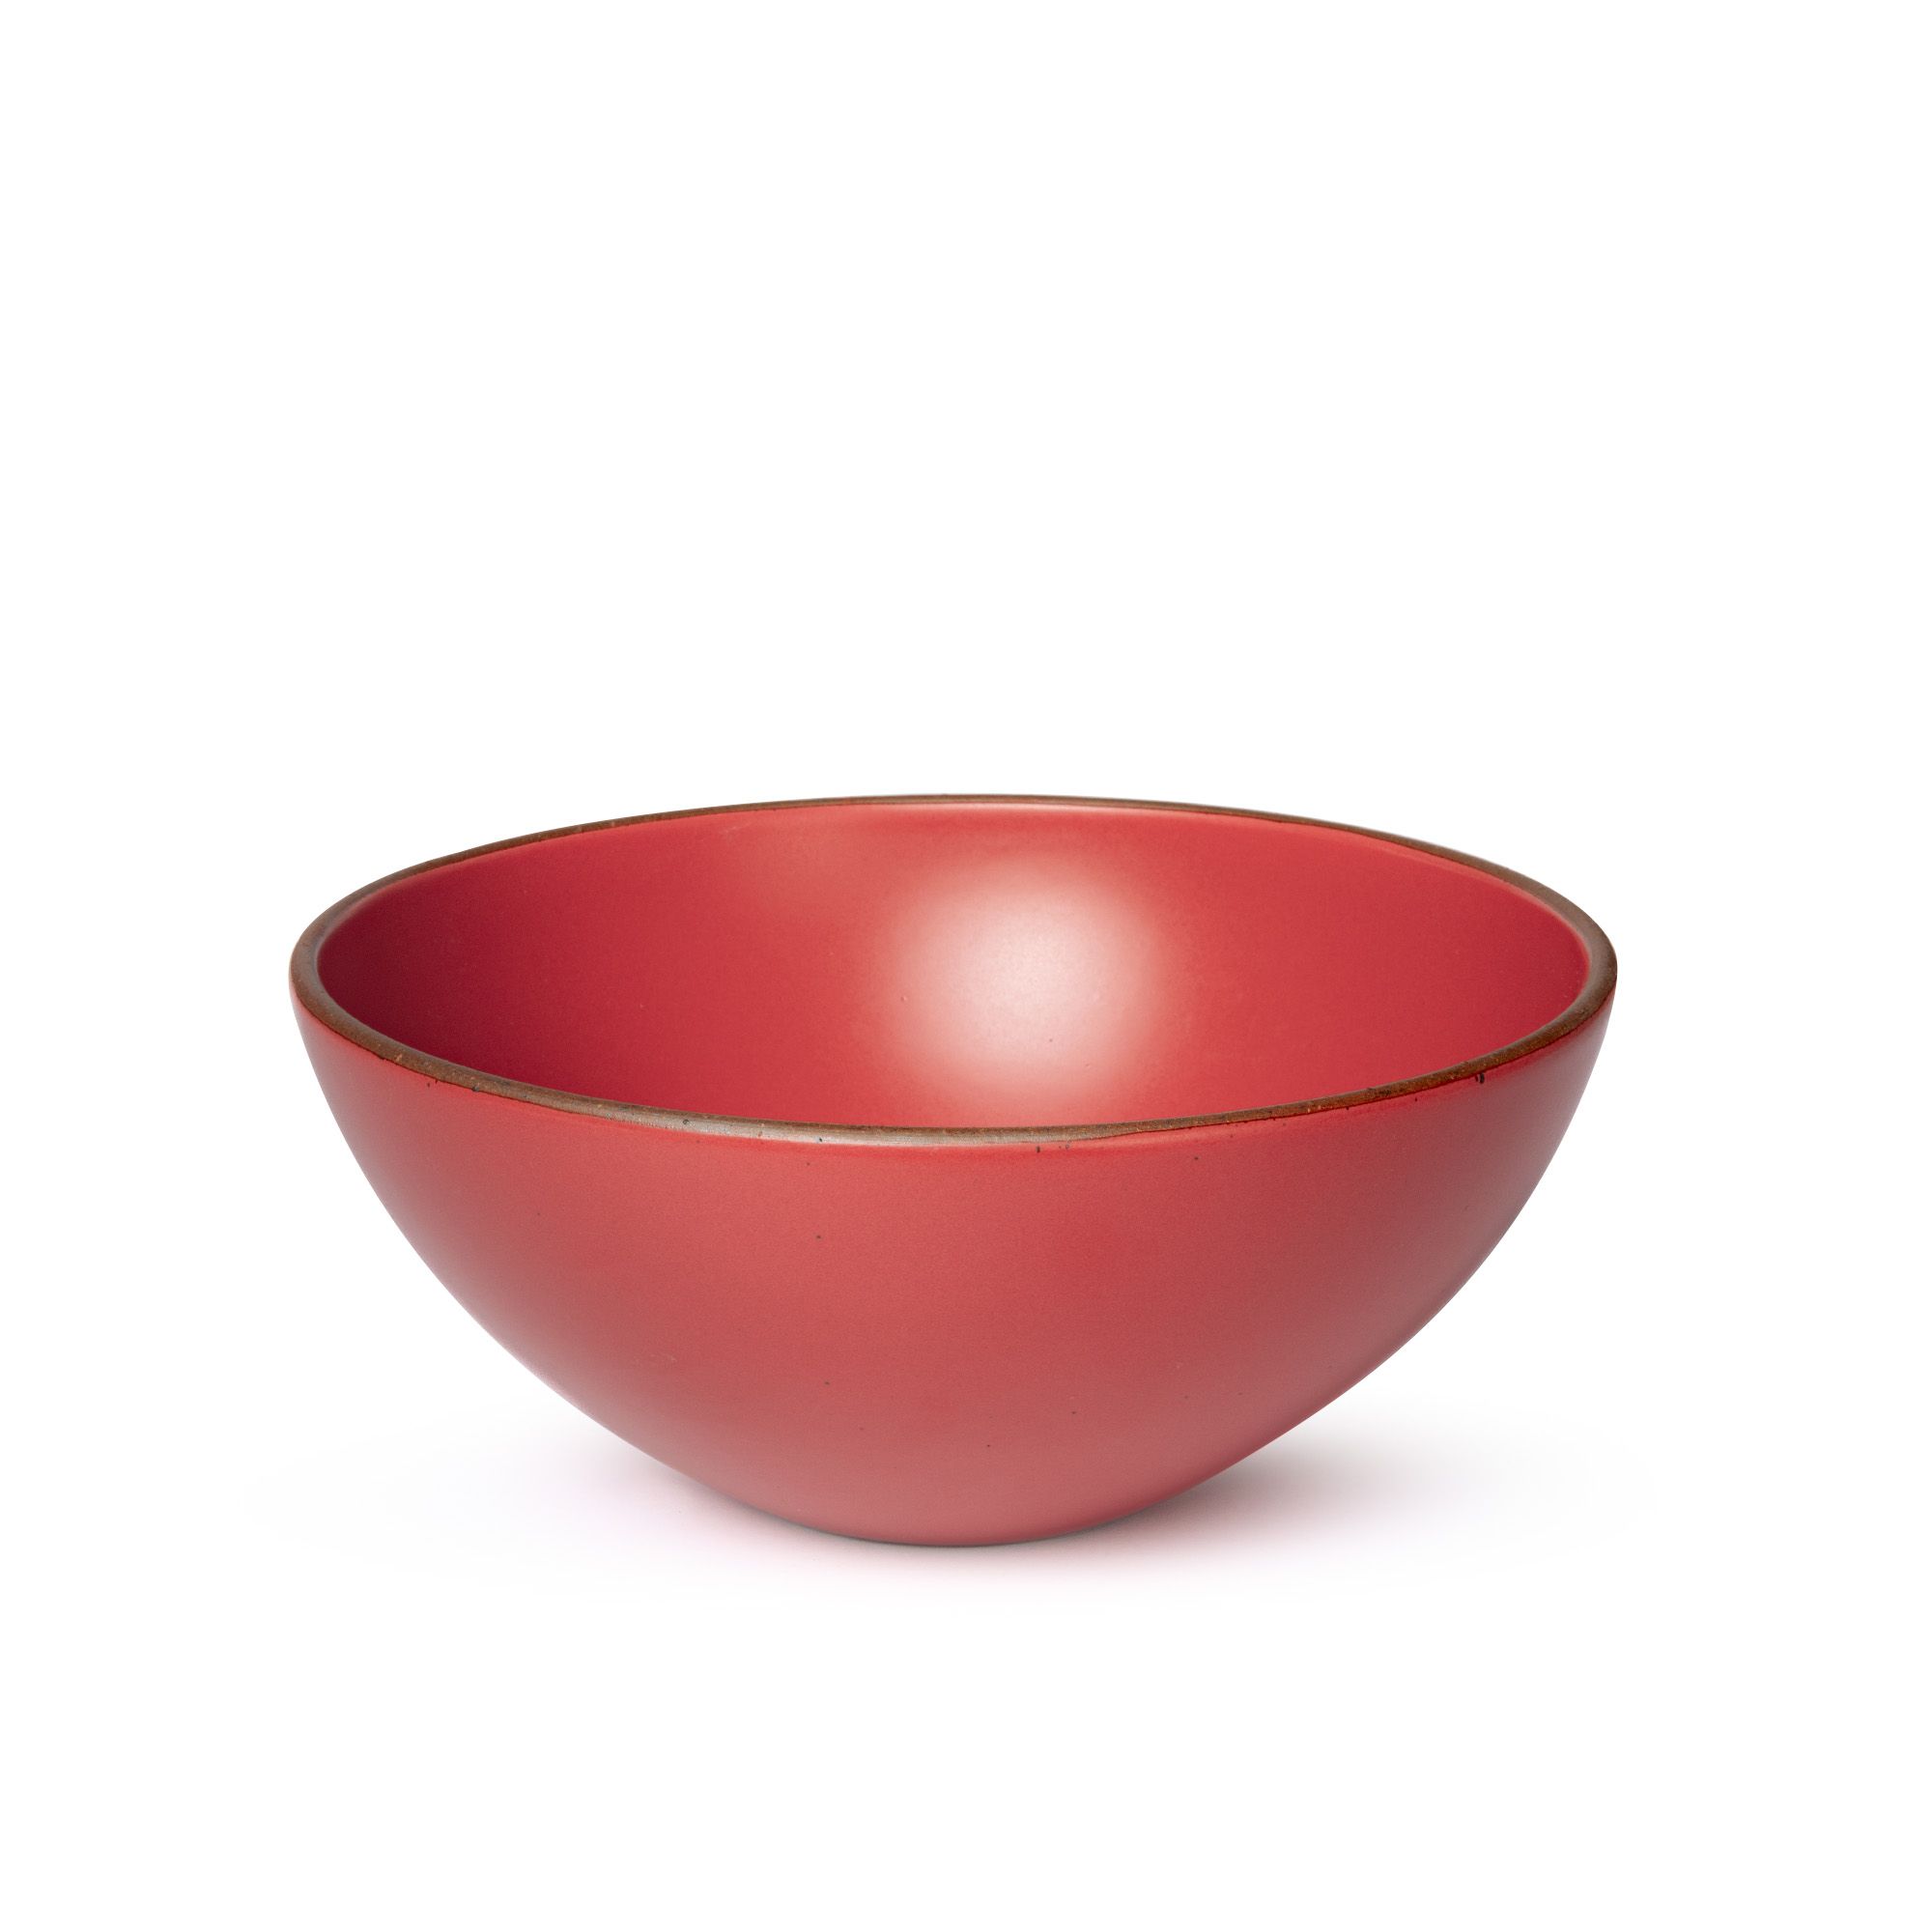 A large ceramic mixing bowl in a bold red color featuring iron speckles and an unglazed rim